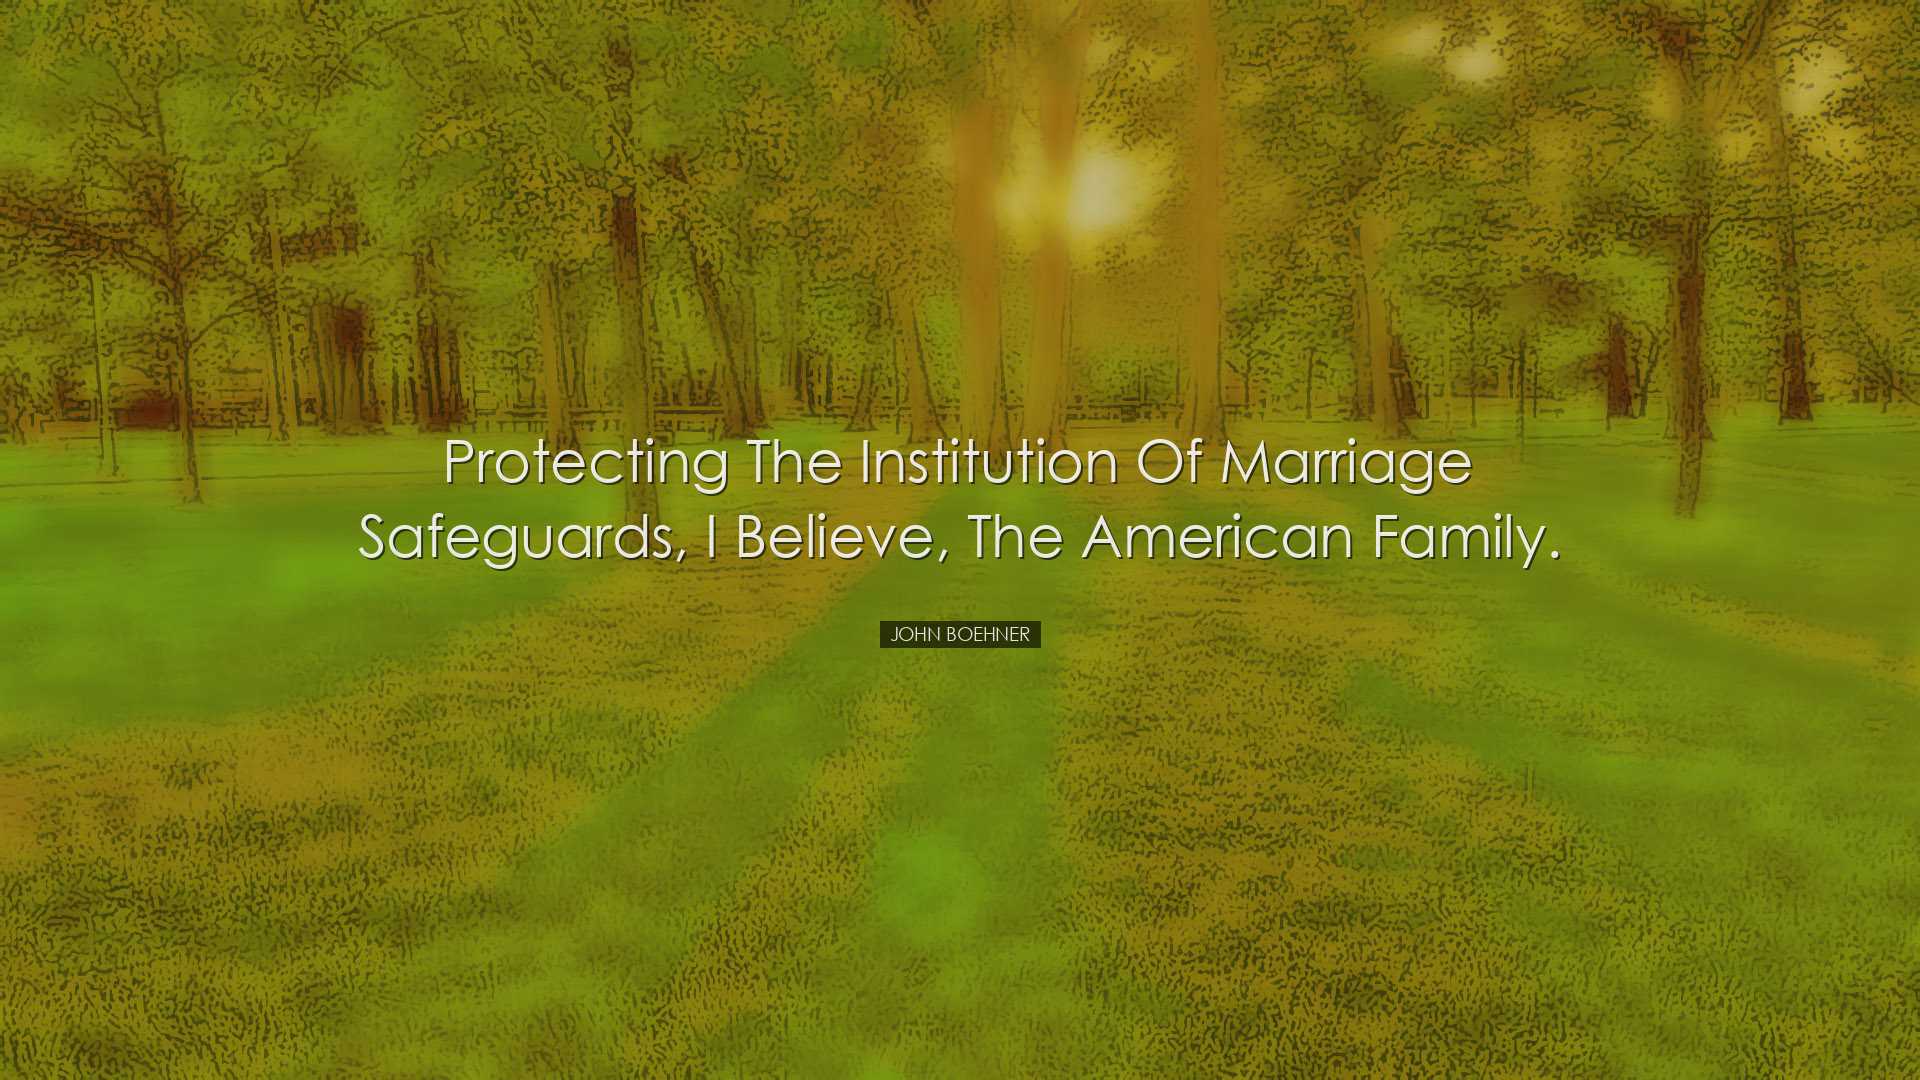 Protecting the institution of marriage safeguards, I believe, the